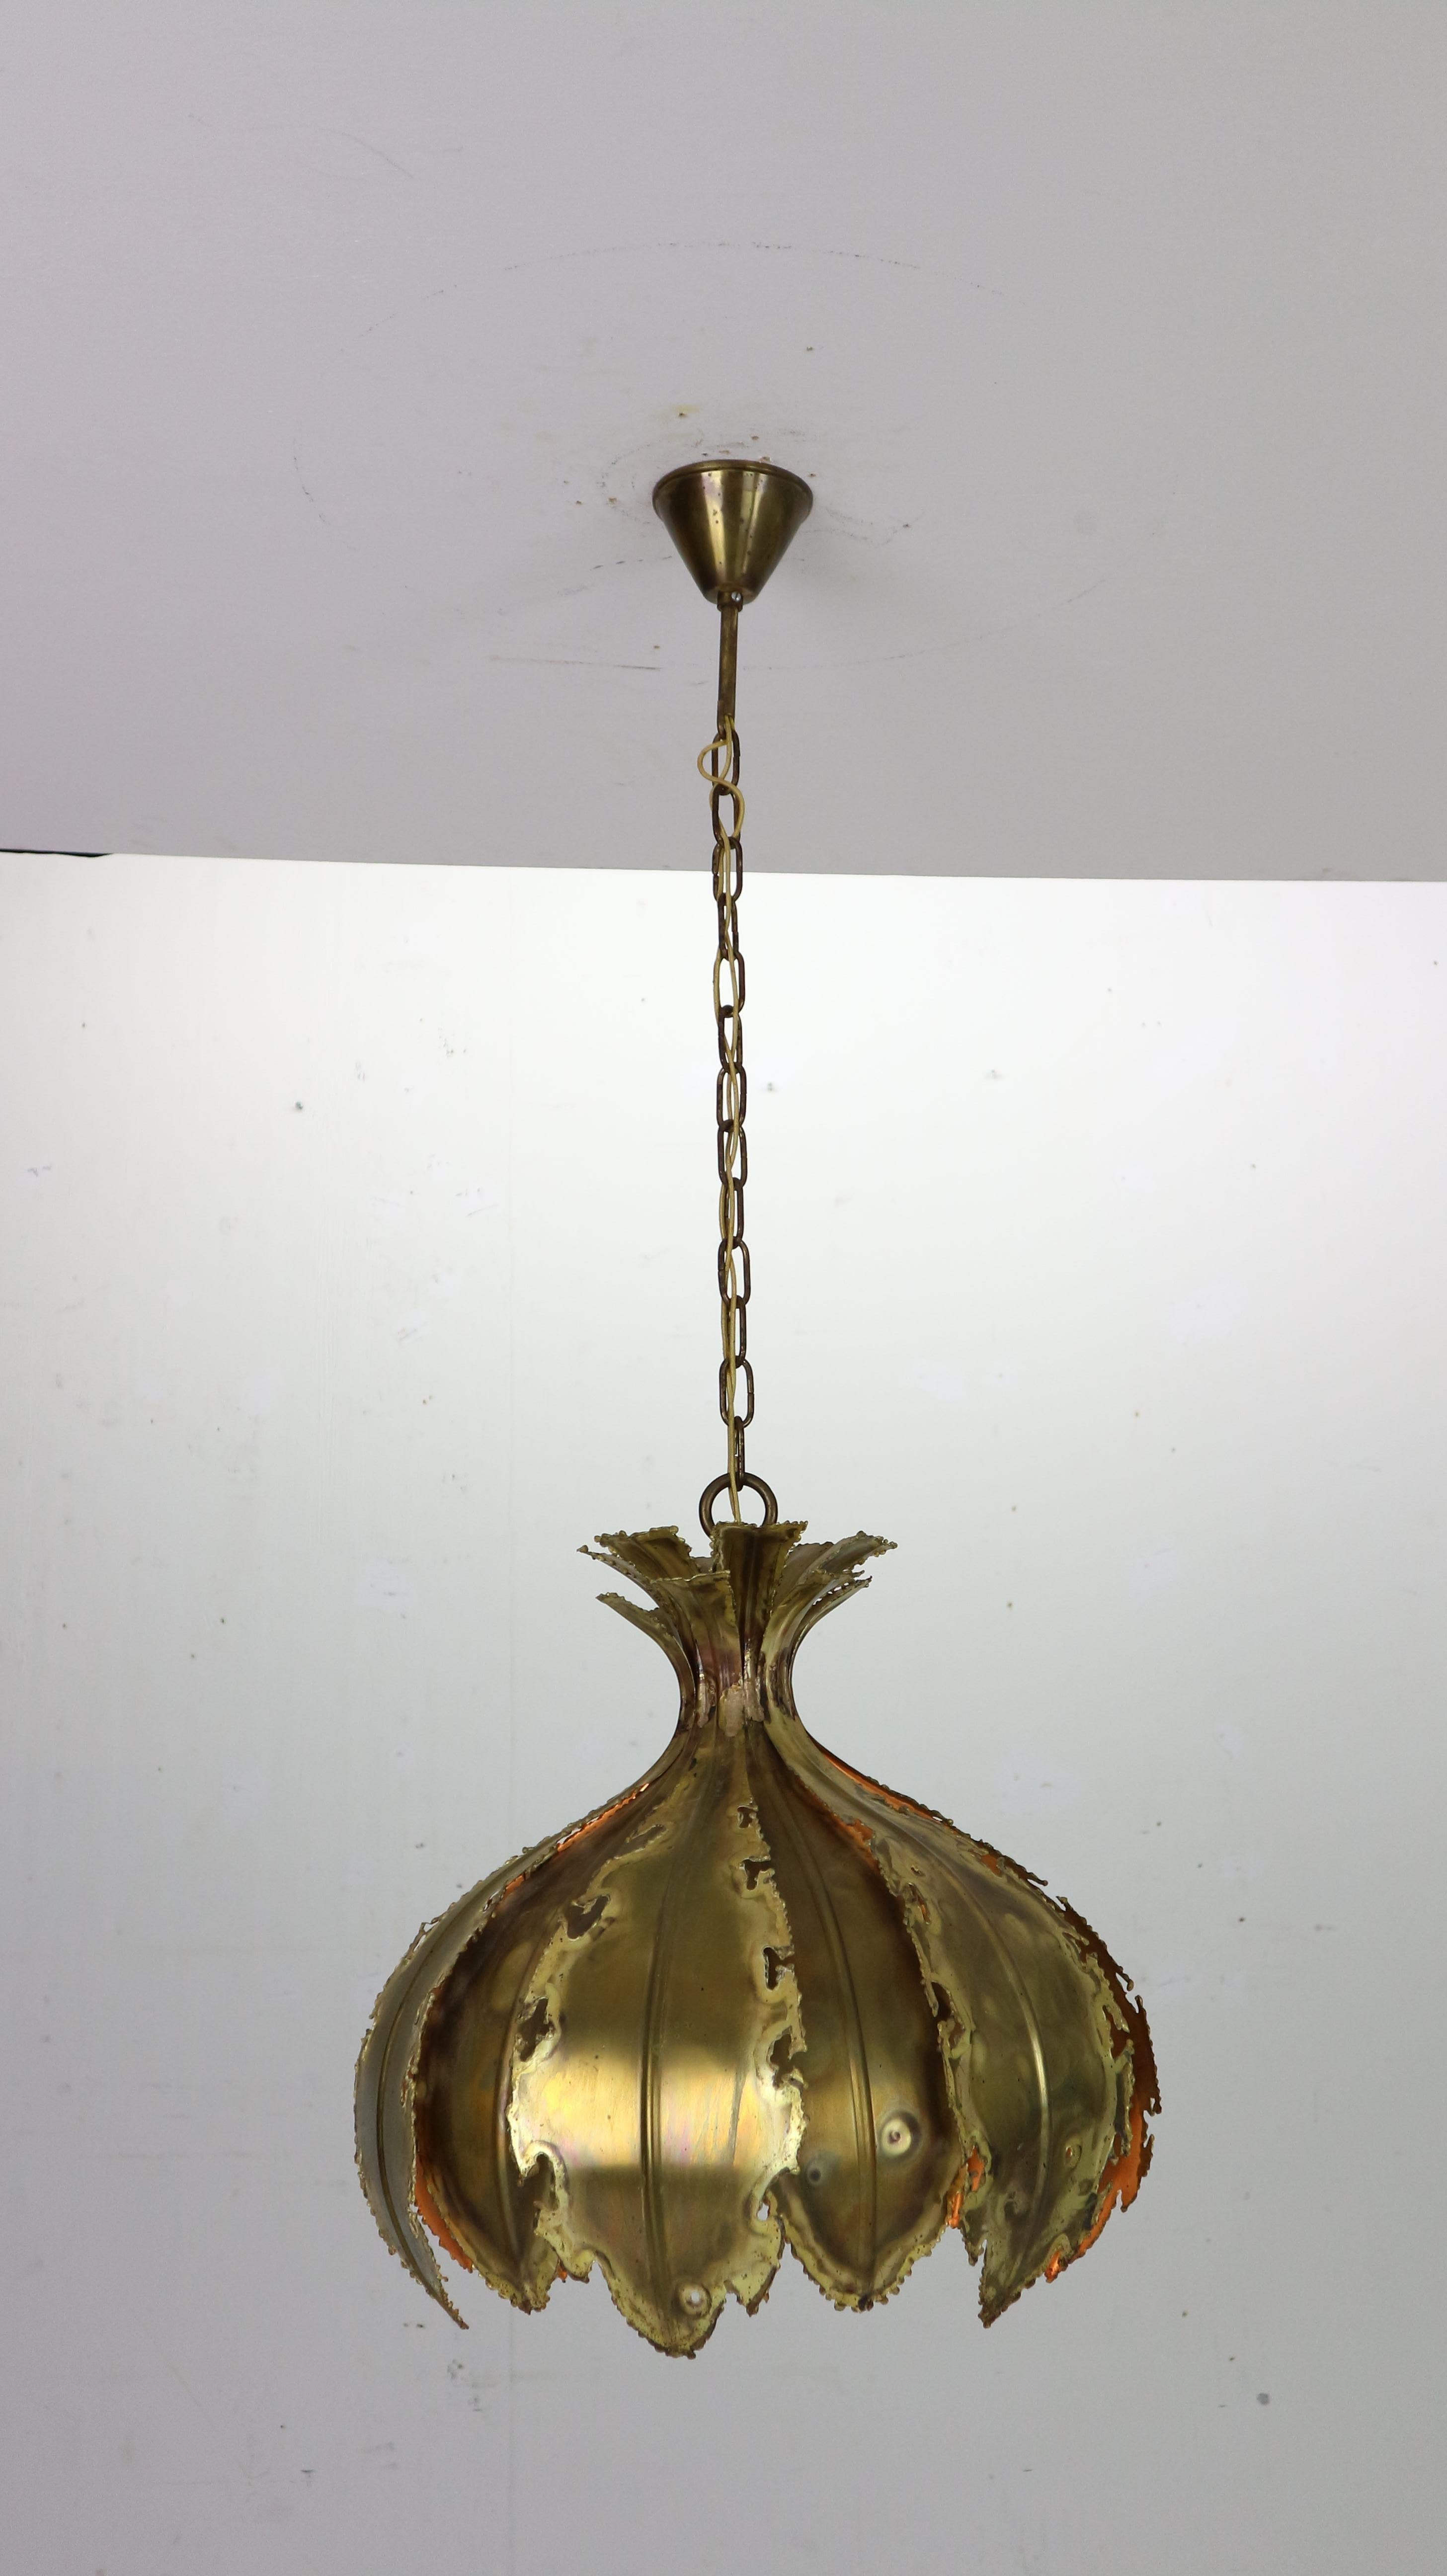 A very nice brass hanging lamp designed by Svend Aage Holm Sorensen for Holm Sorensen & Co – Denmark, 1960s.
Danish modern Brutalist patinated brass pendant lamp named The Onion. The brass petals are torch cut and acid treated for effect - Holm